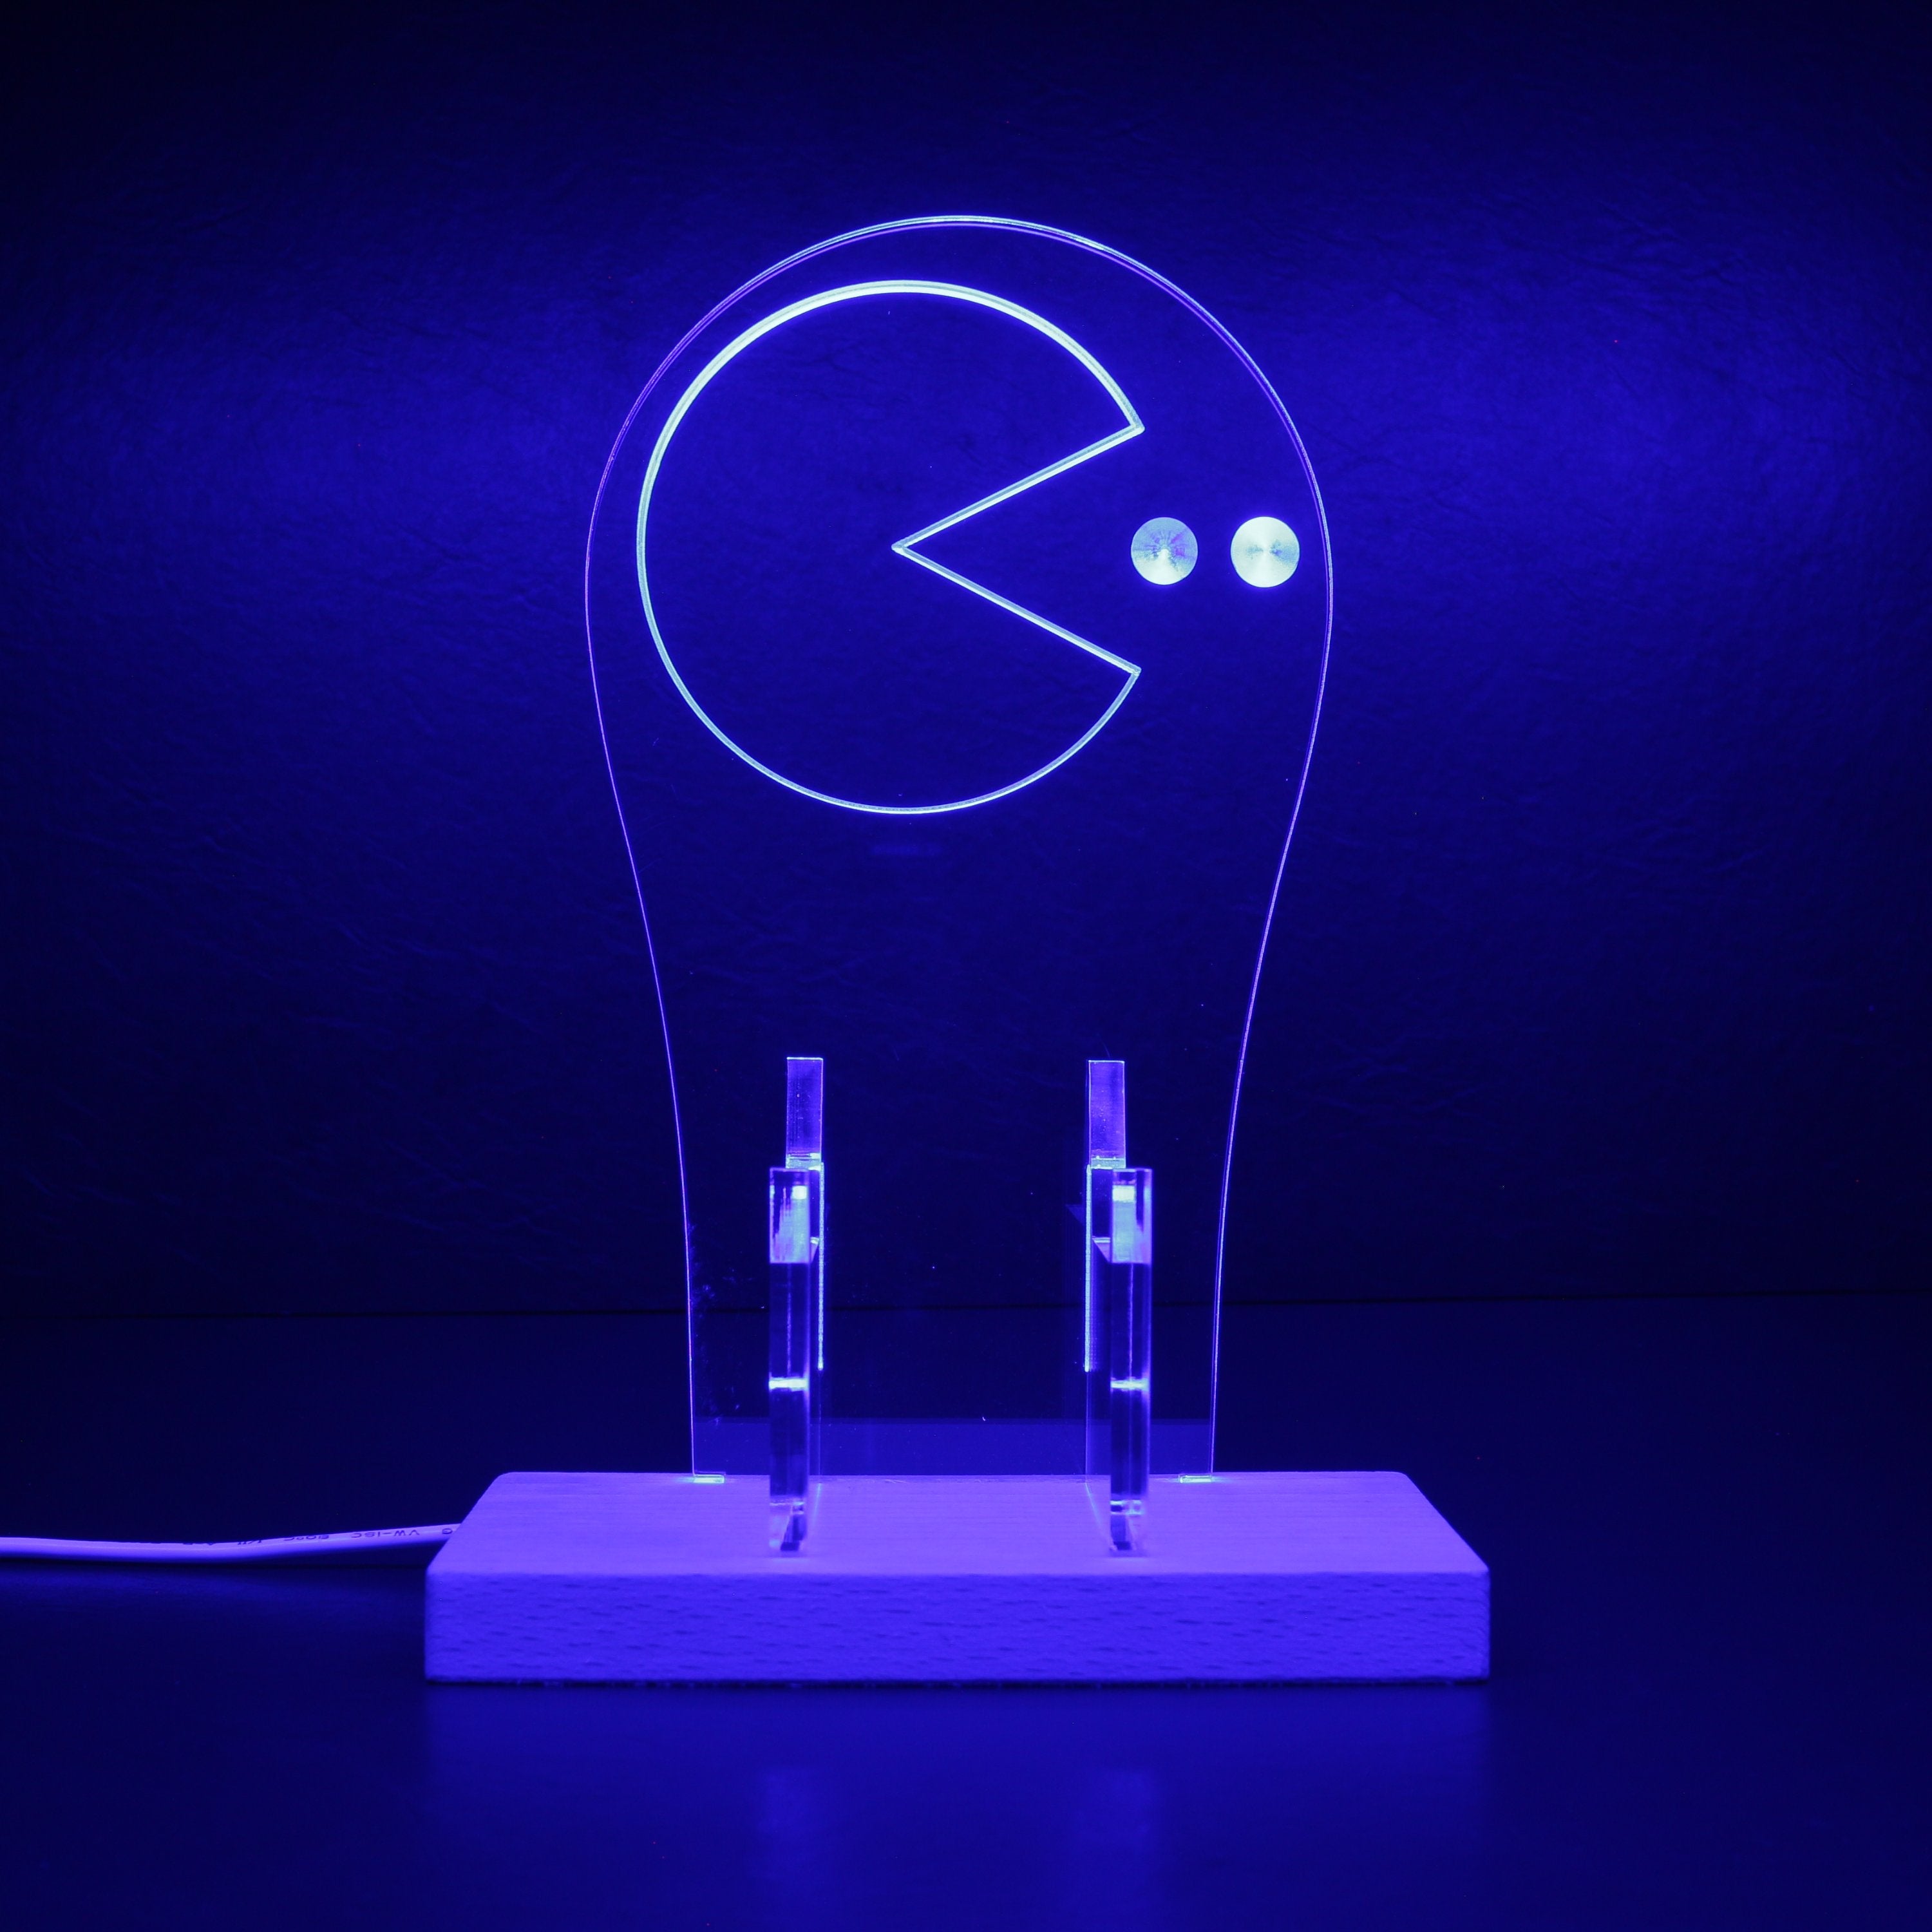 PACMAN LED Gaming Headset Controller Stand